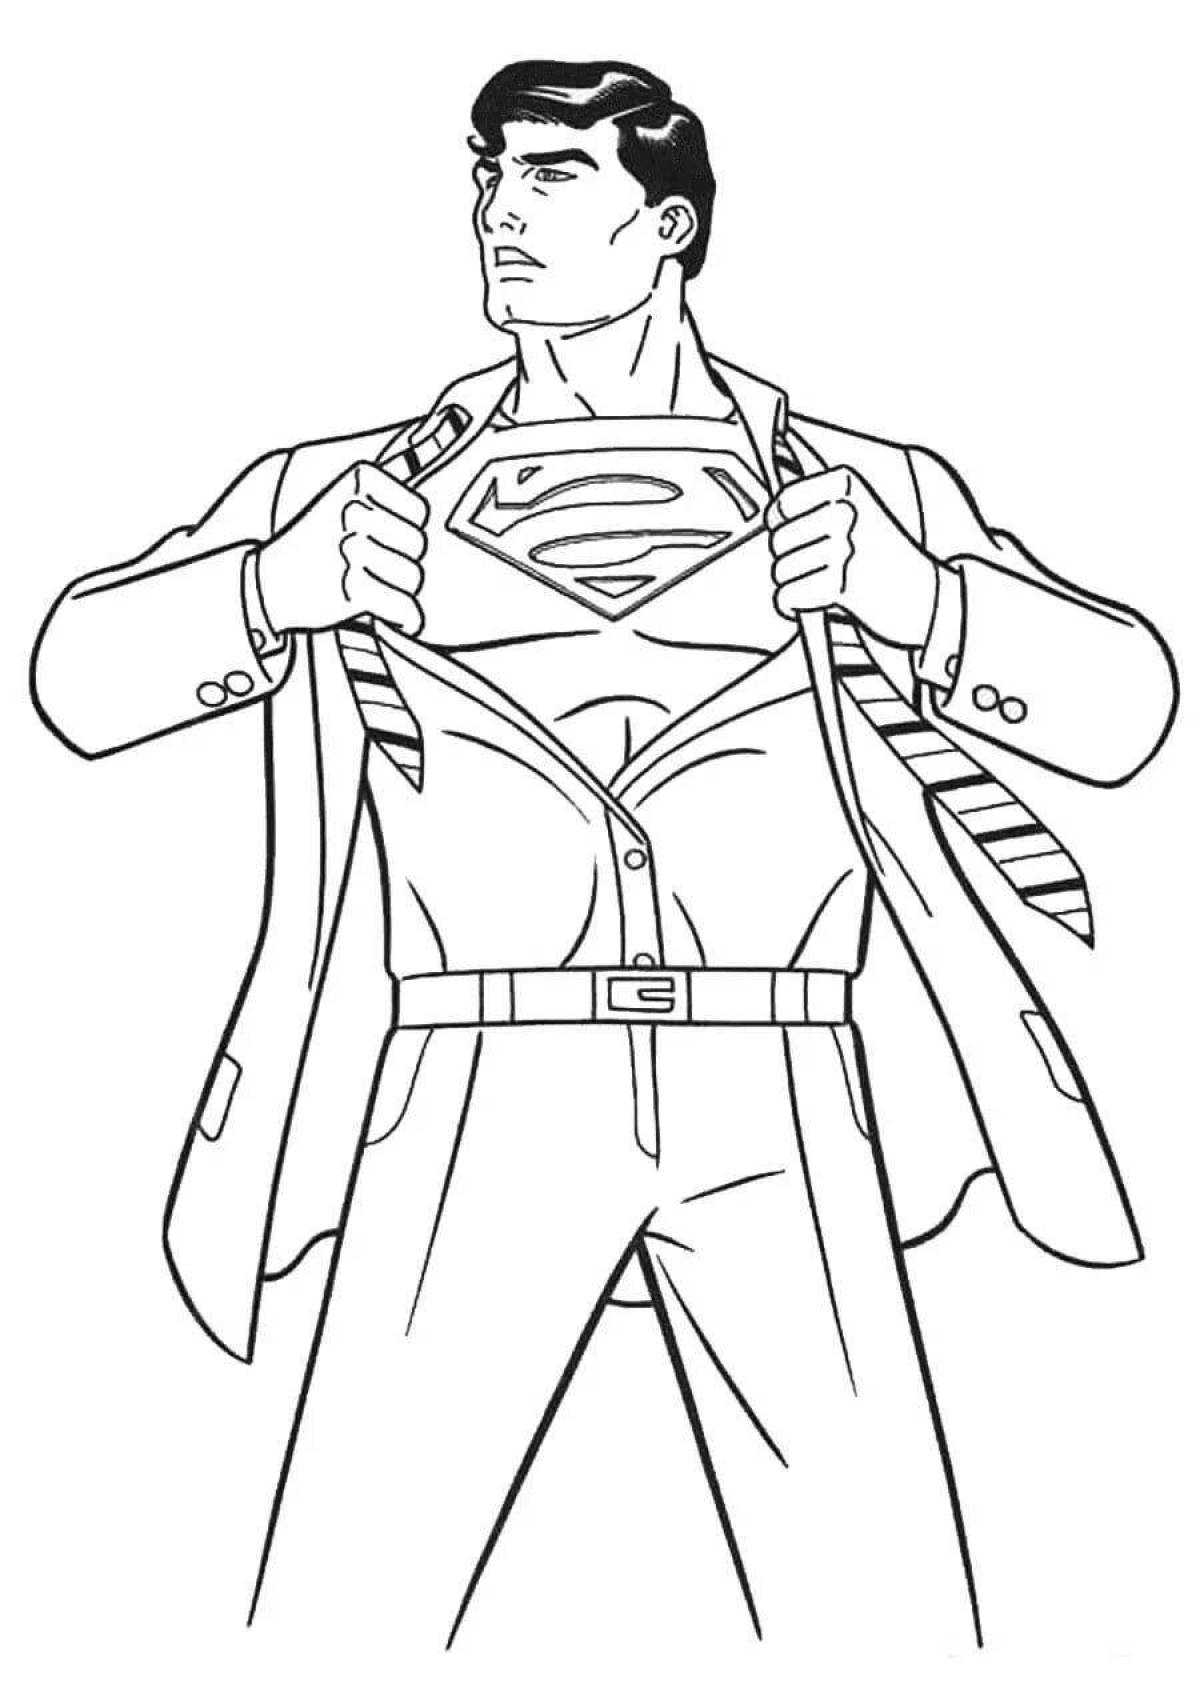 Amazing superman coloring book for kids 3-4 years old